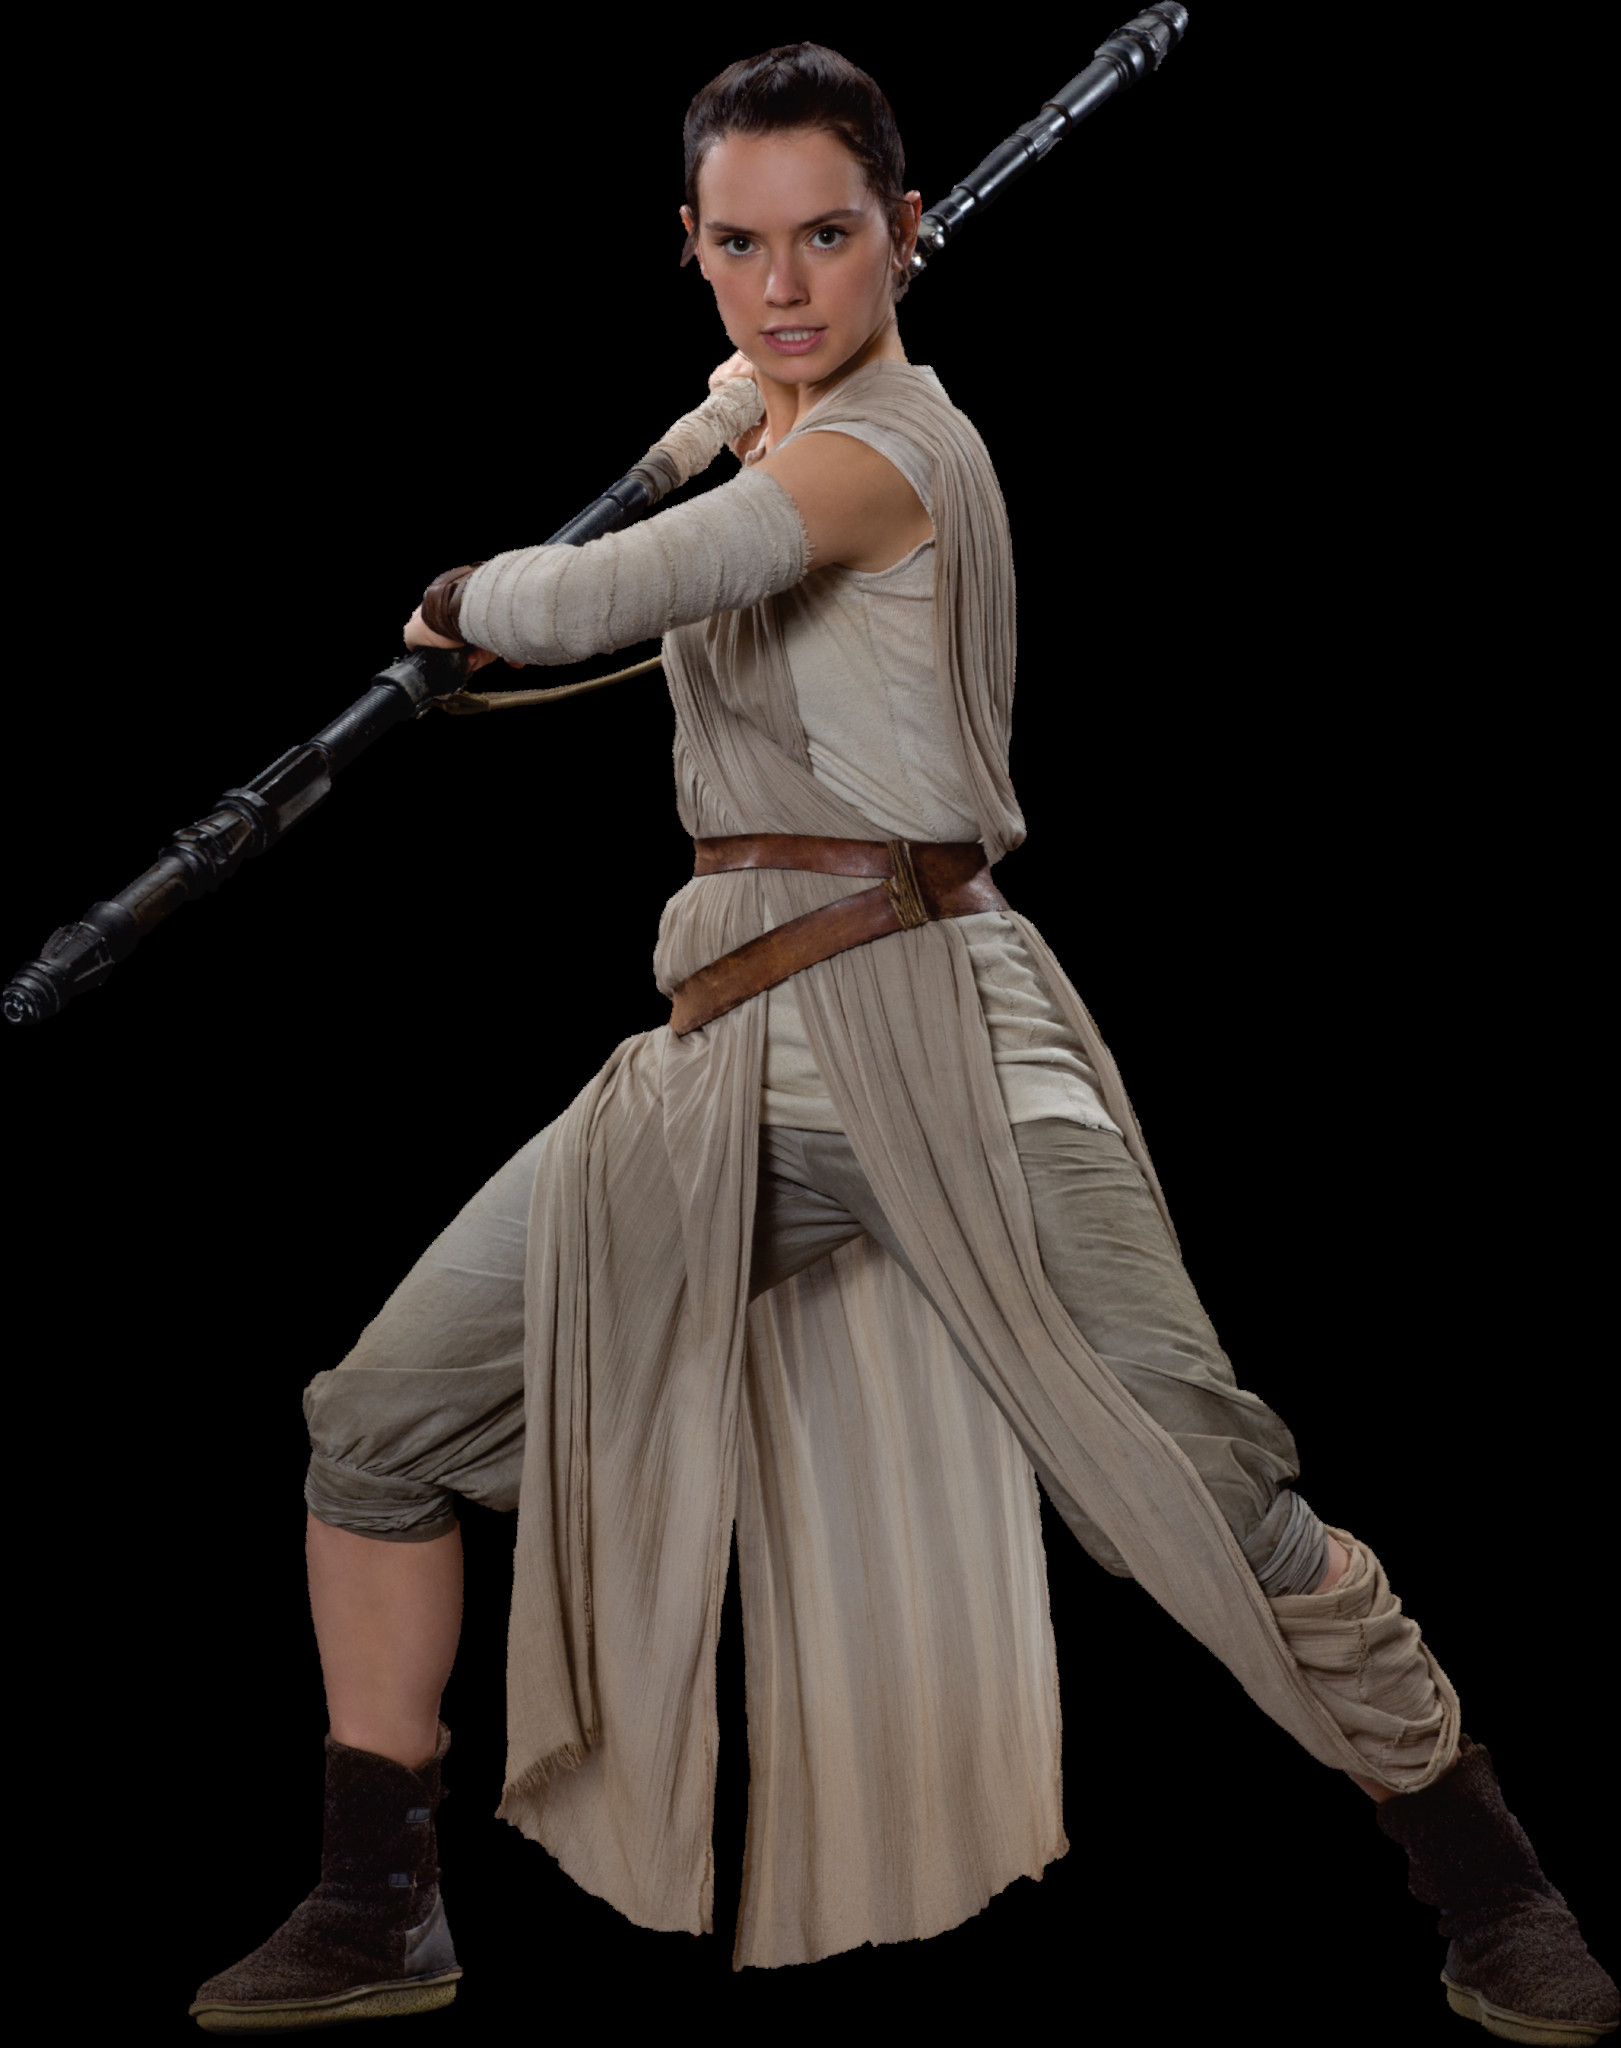 Star Wars DIY Costume
 How to make an awesome DIY Star Wars Rey costume on a bud